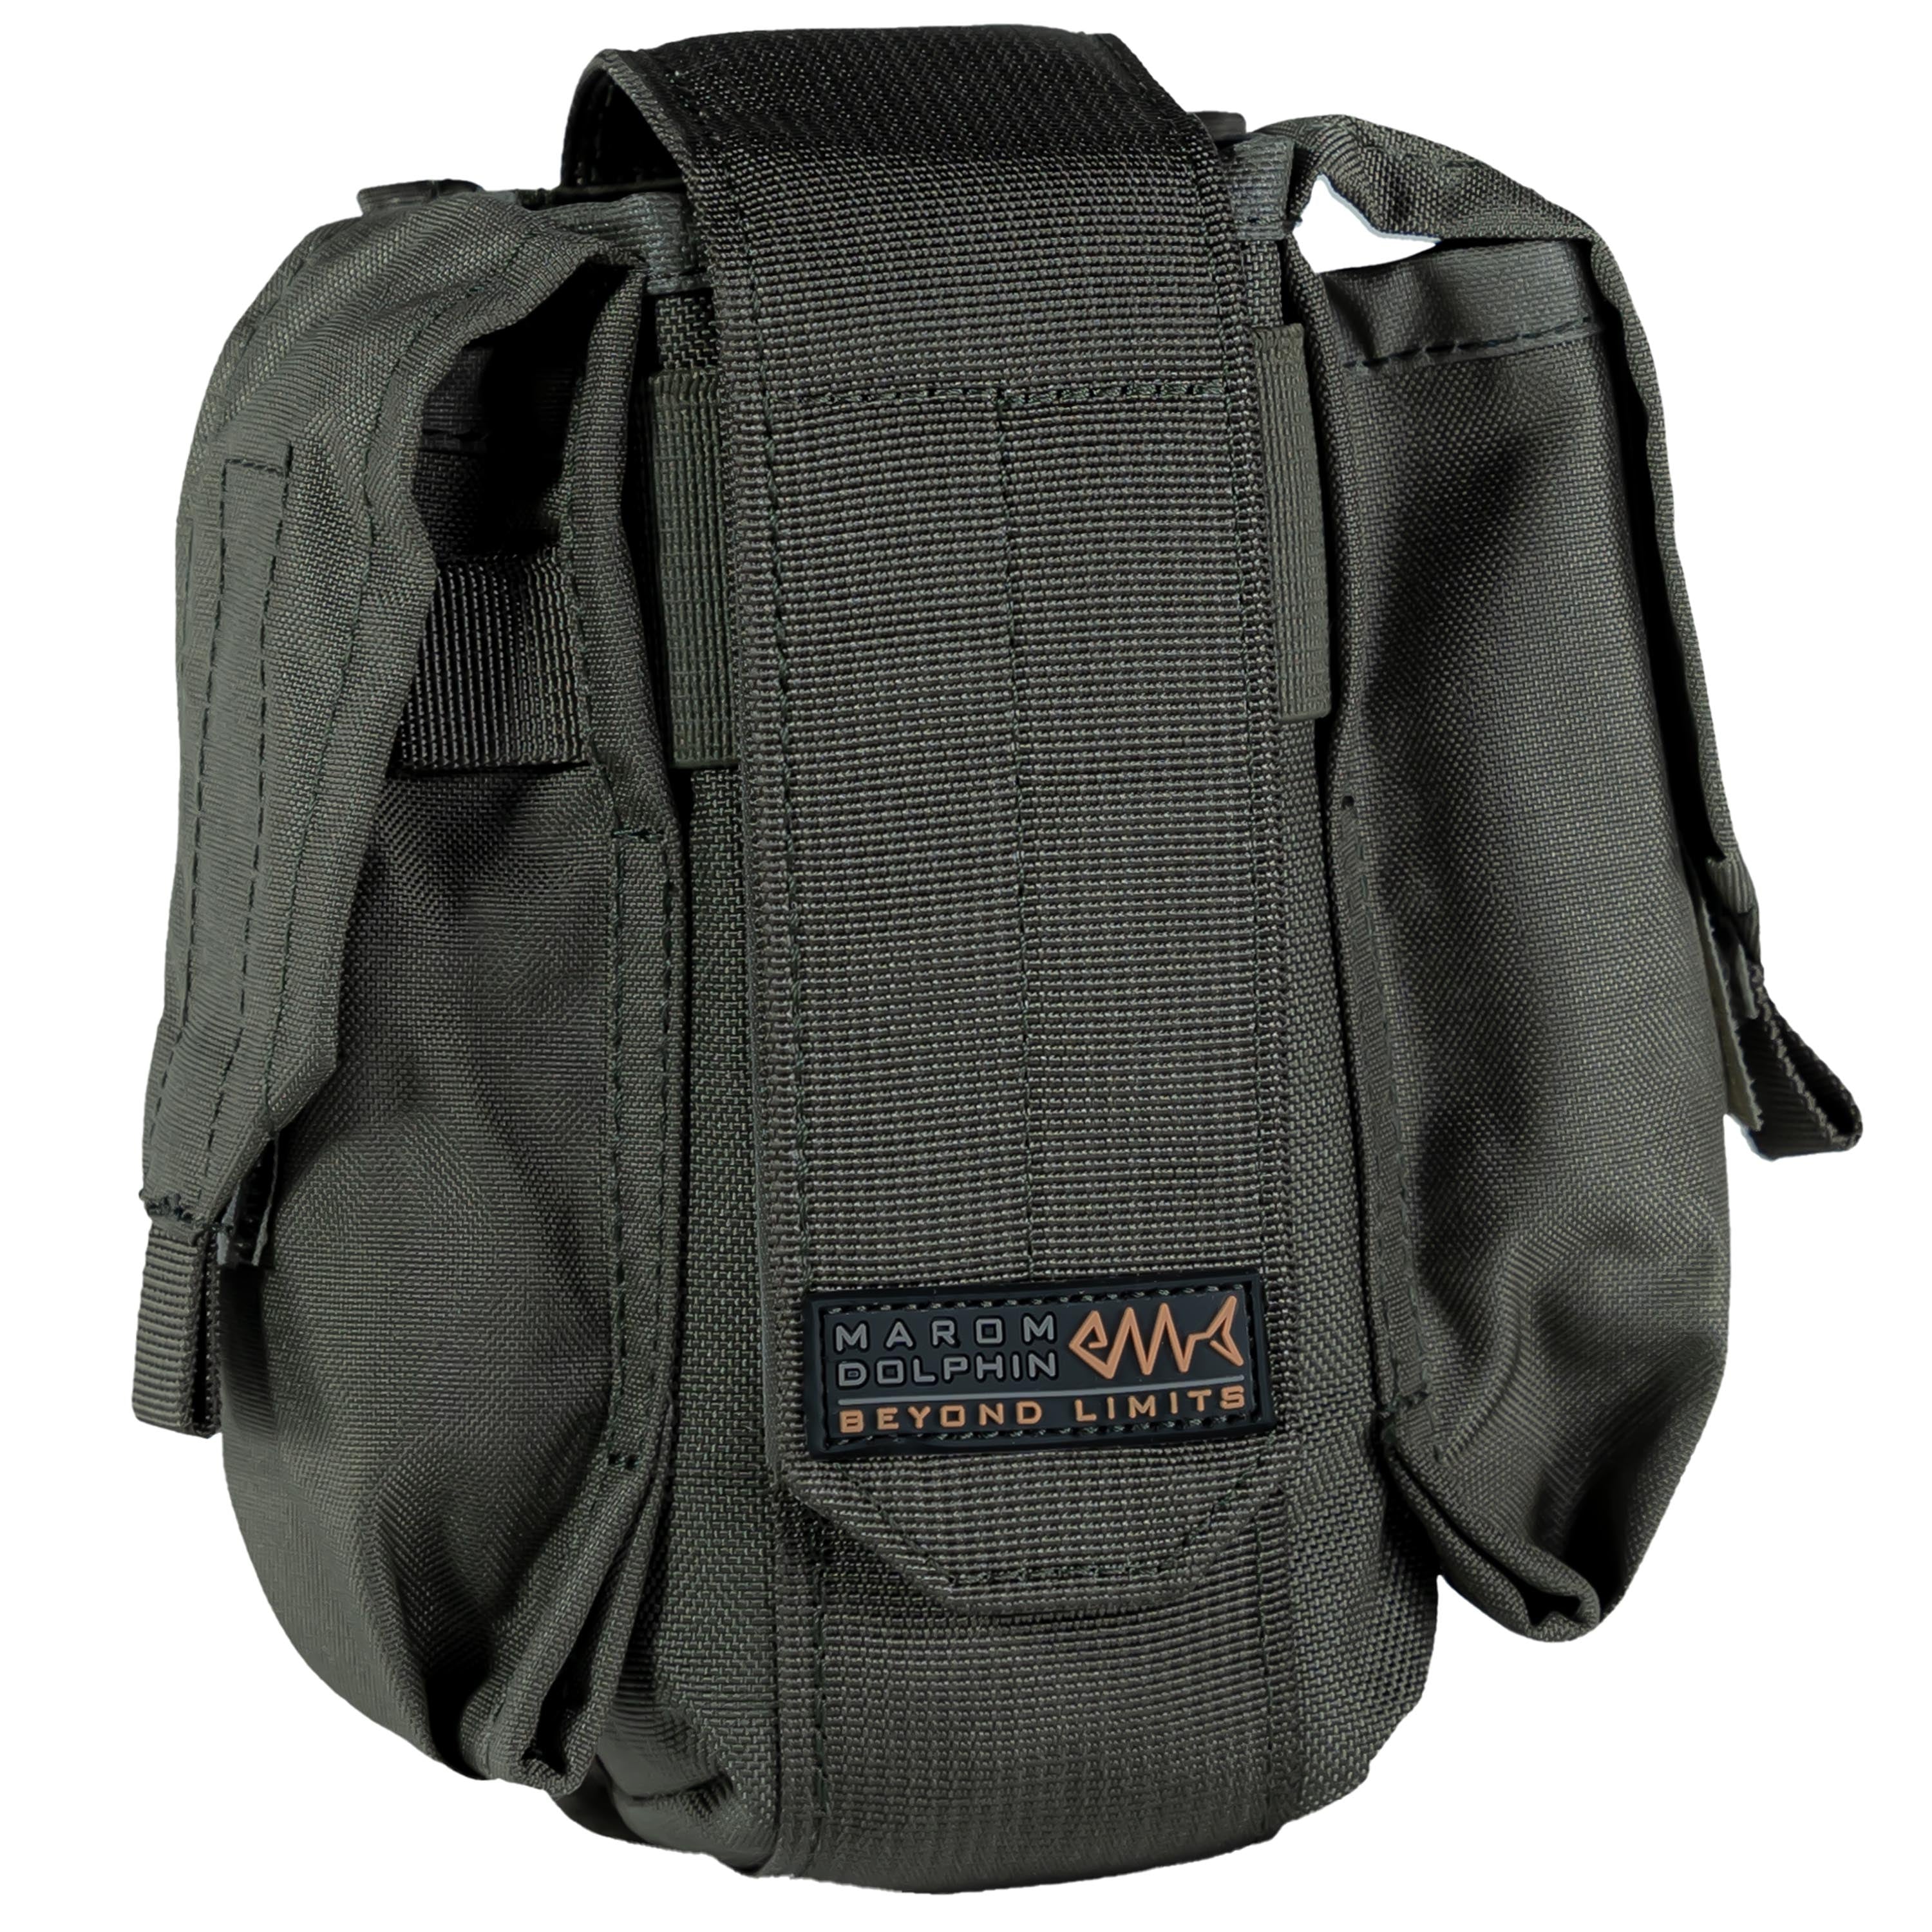 M4 Double Magazine MOLLE Pouch with pockets